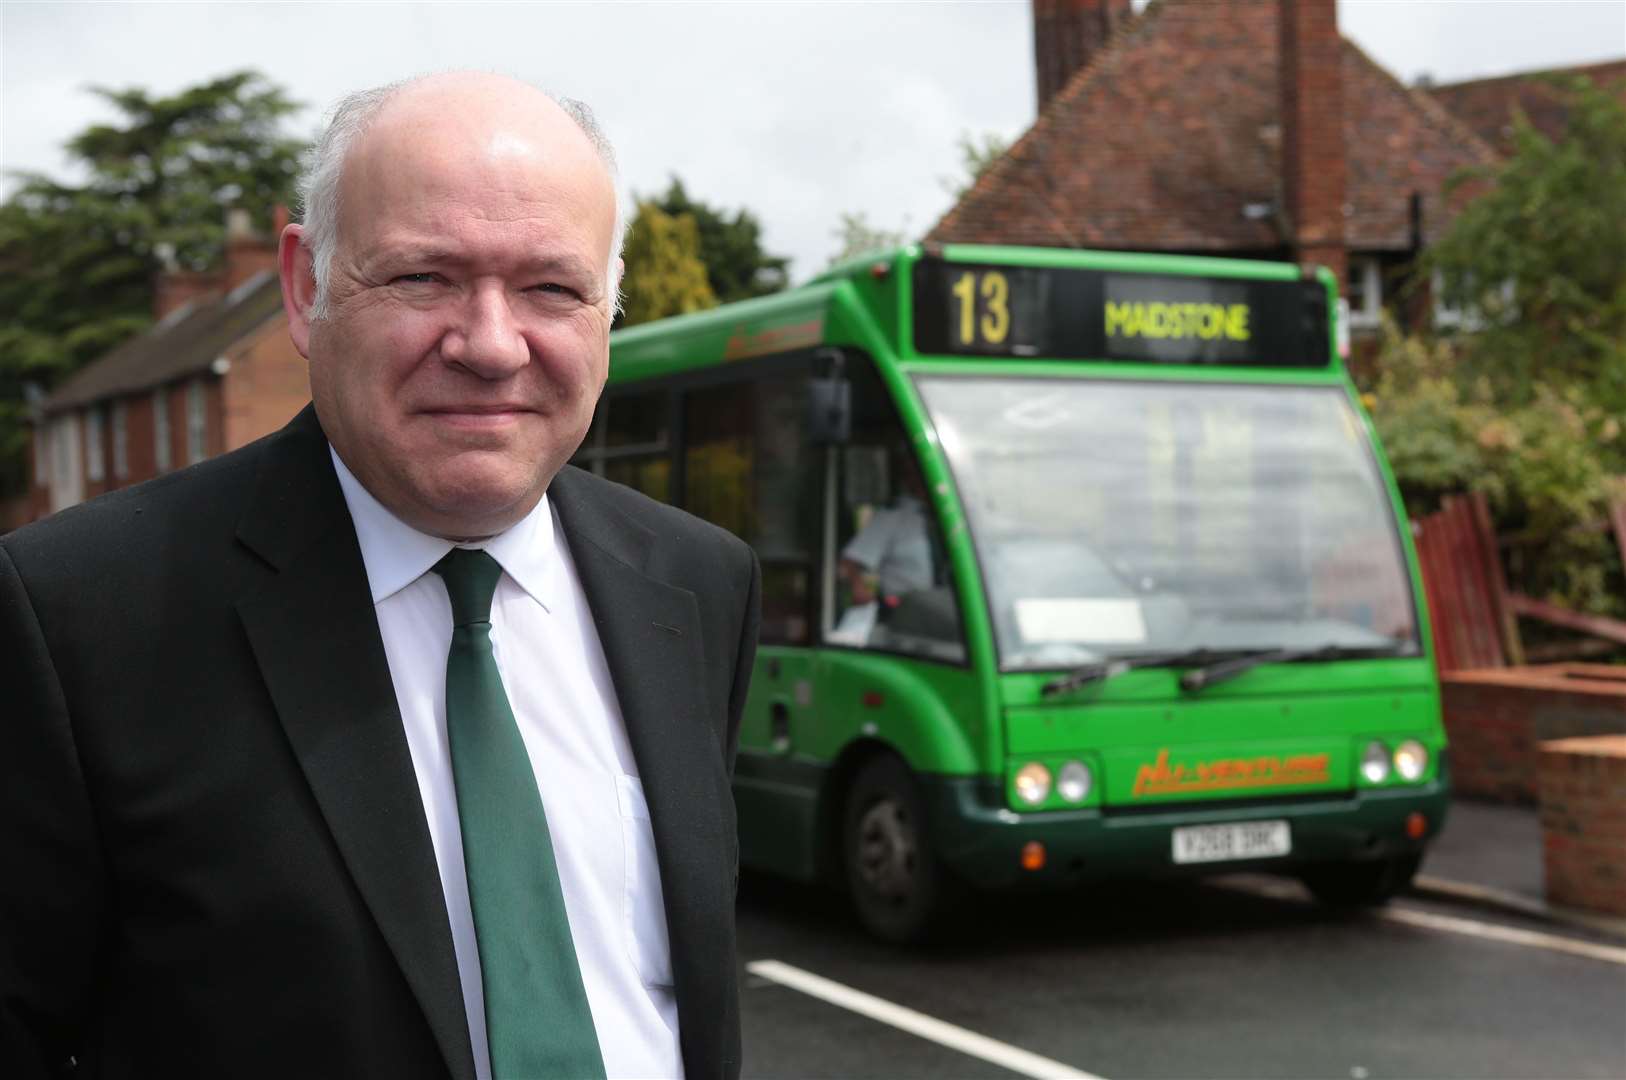 Owner Norman Kemp says the long-term future of the service relies on passenger numbers